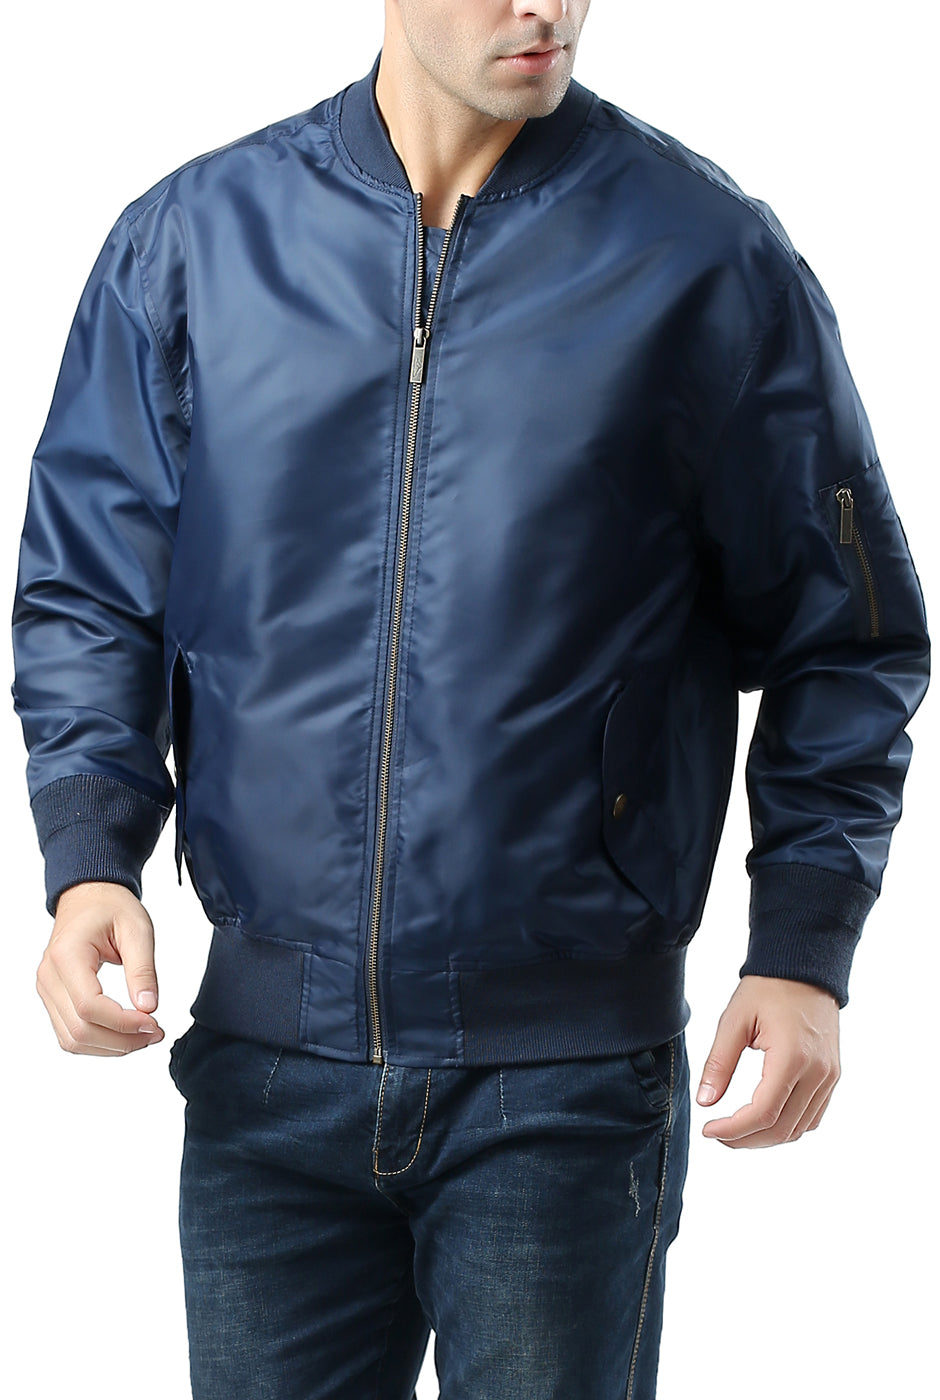 Landing Leathers Men's Air Force MA1 Bomber Jacket